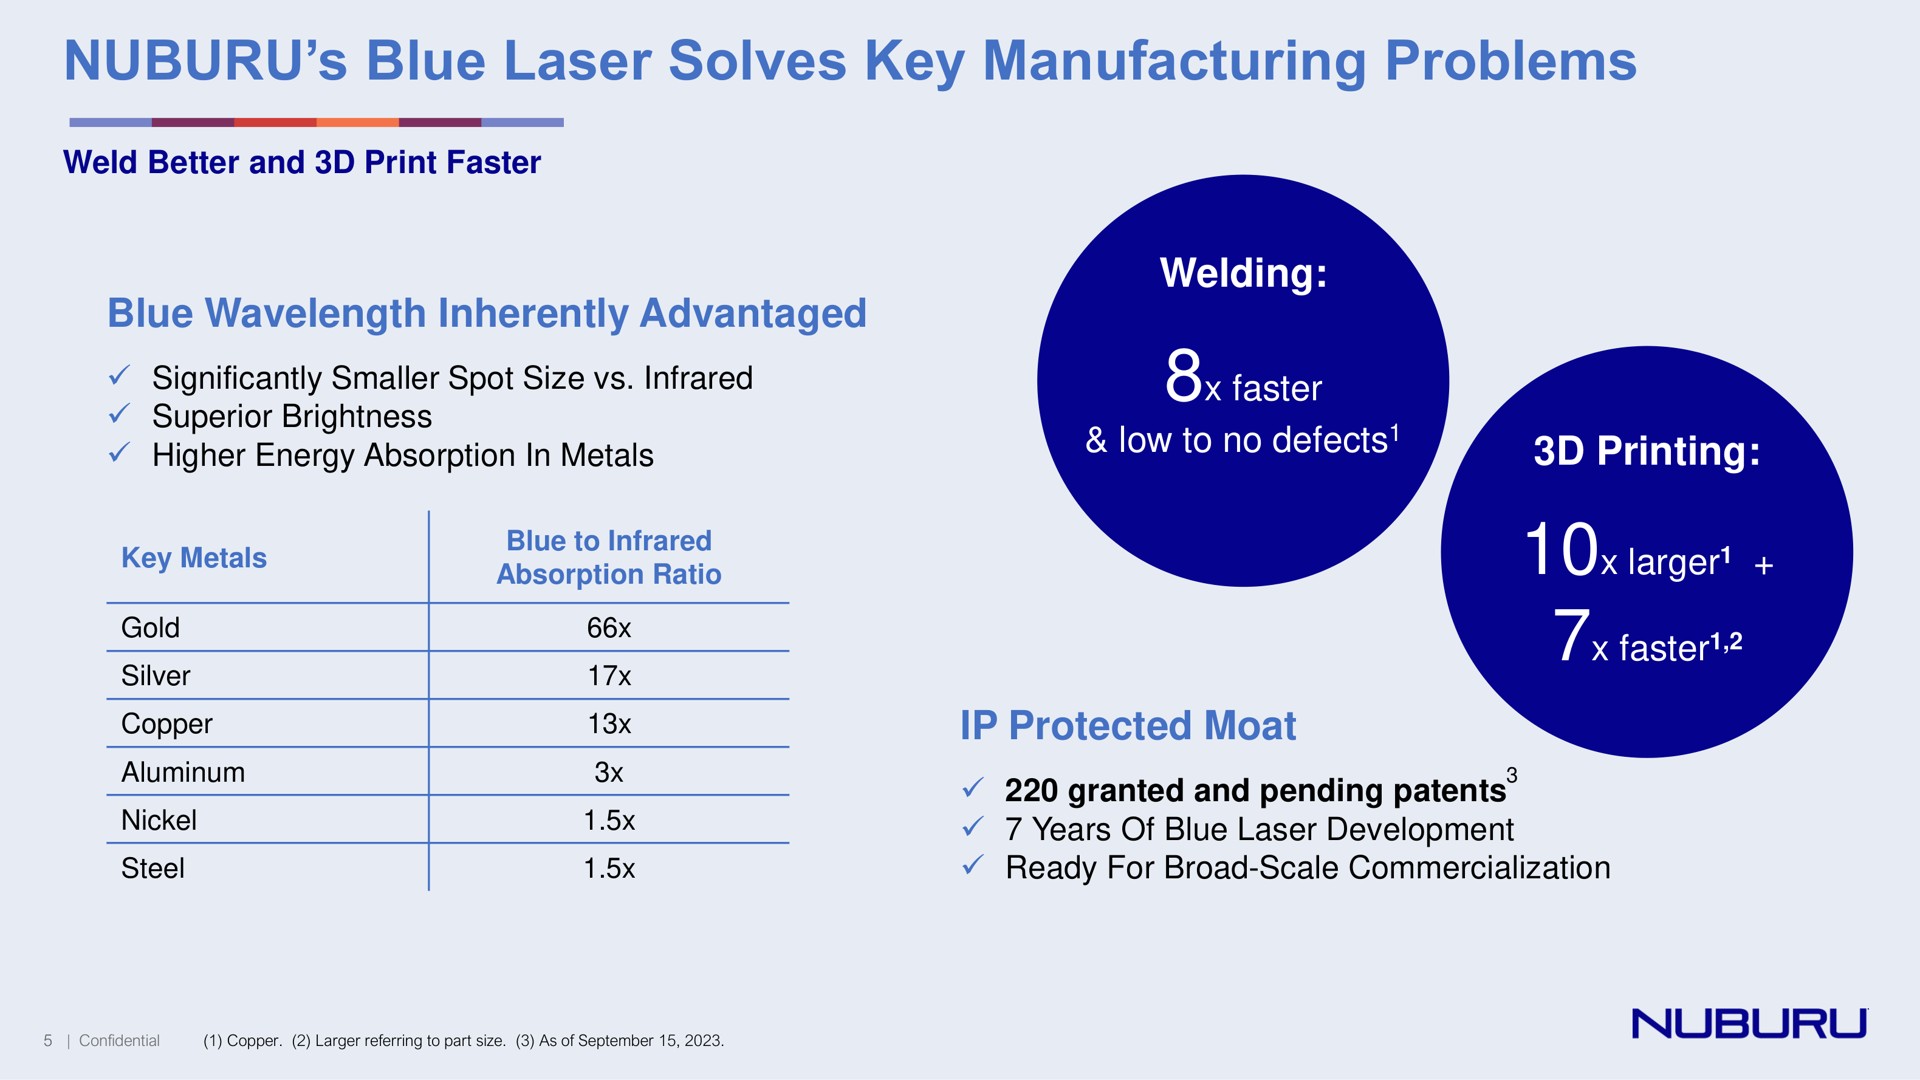 blue laser solves key manufacturing problems weld better and print faster blue inherently advantaged significantly smaller spot size infrared superior brightness higher energy absorption in metals welding faster low to no defects printing faster protected moat granted and pending patents years of blue laser development ready for broad scale commercialization a a ratio copper aluminum nickel steel | NUBURU